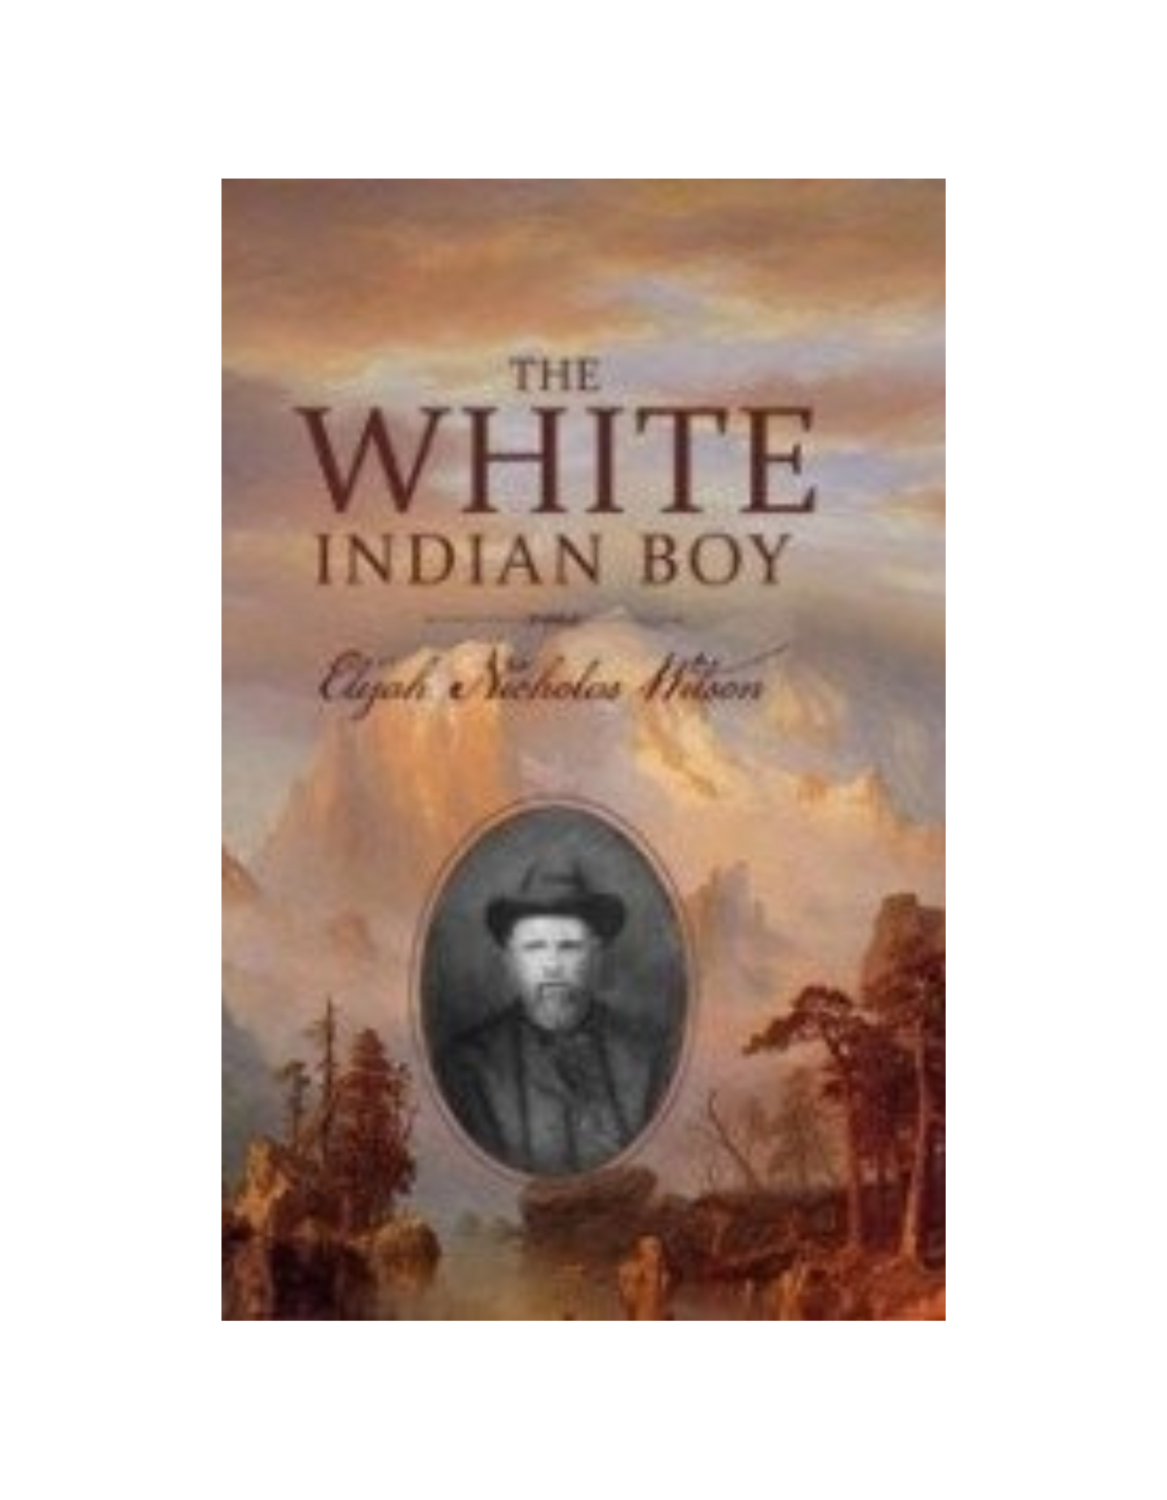 White Indian Boy, The (1910)